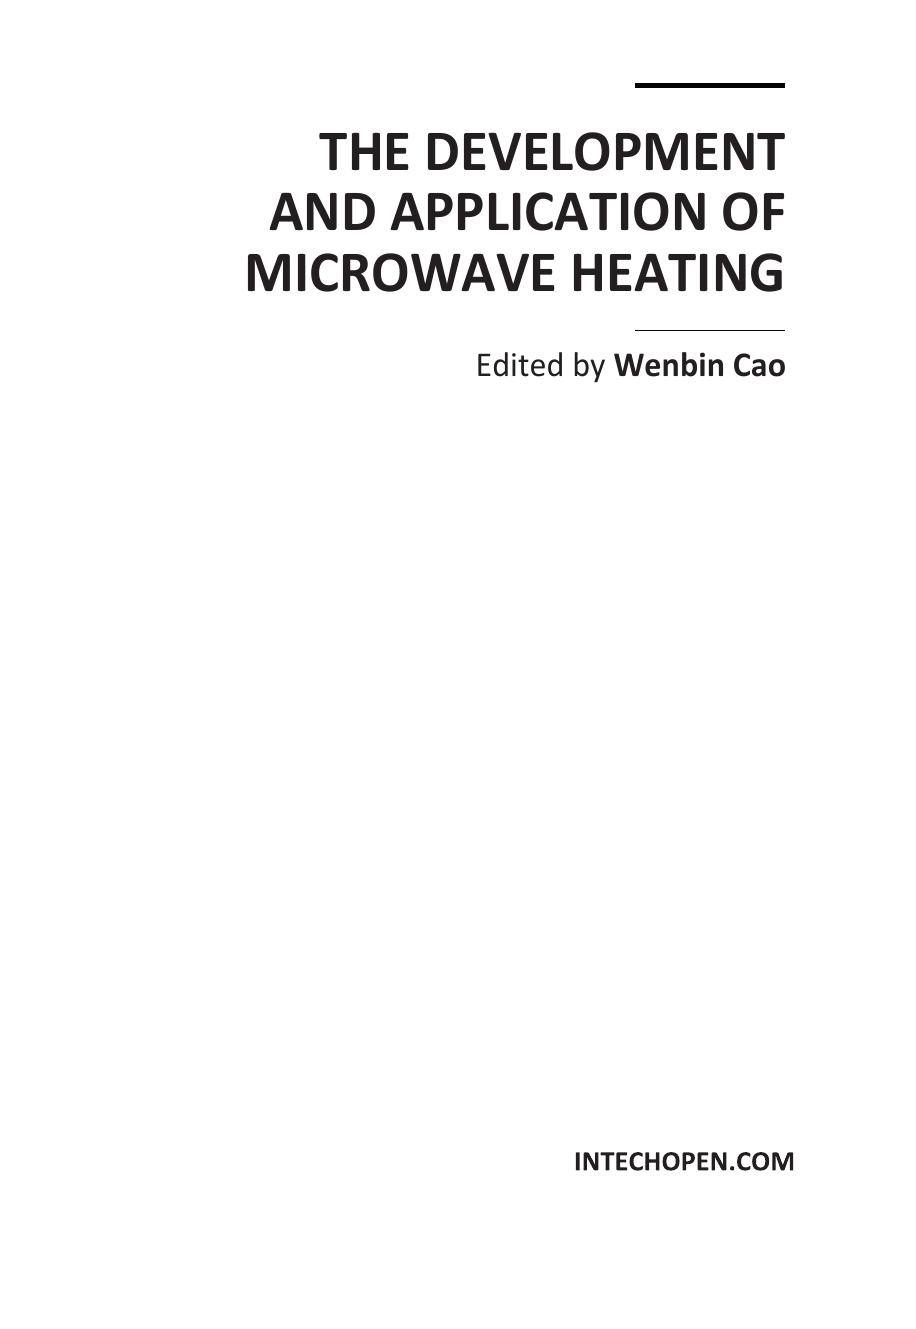 The Development and Application of Microwave Heating 2011.pdf